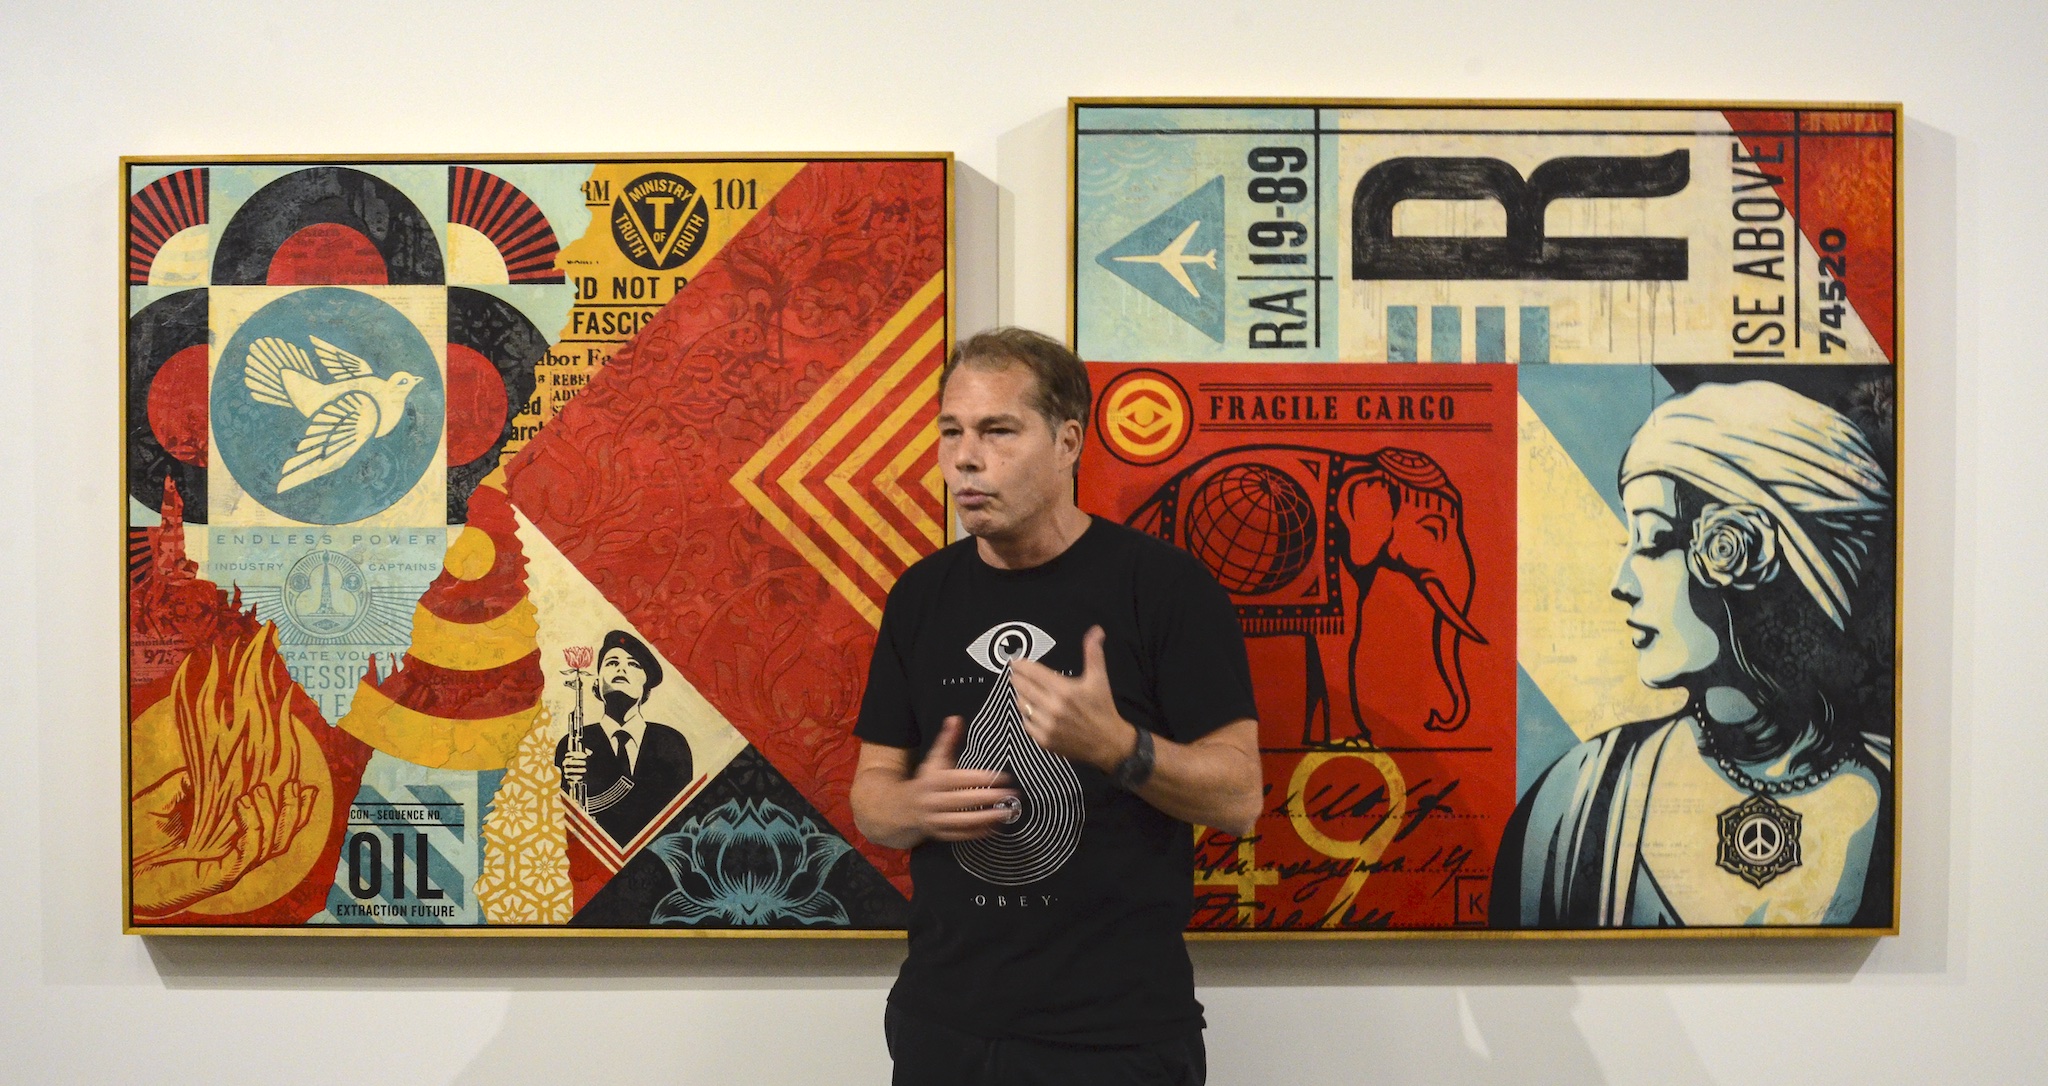 Shepard Fairey poses in front of two of his creations, colorful paintings dense with symbolism like guns, flowers, and an elephant. The overall look has a decoupage or collage effect.